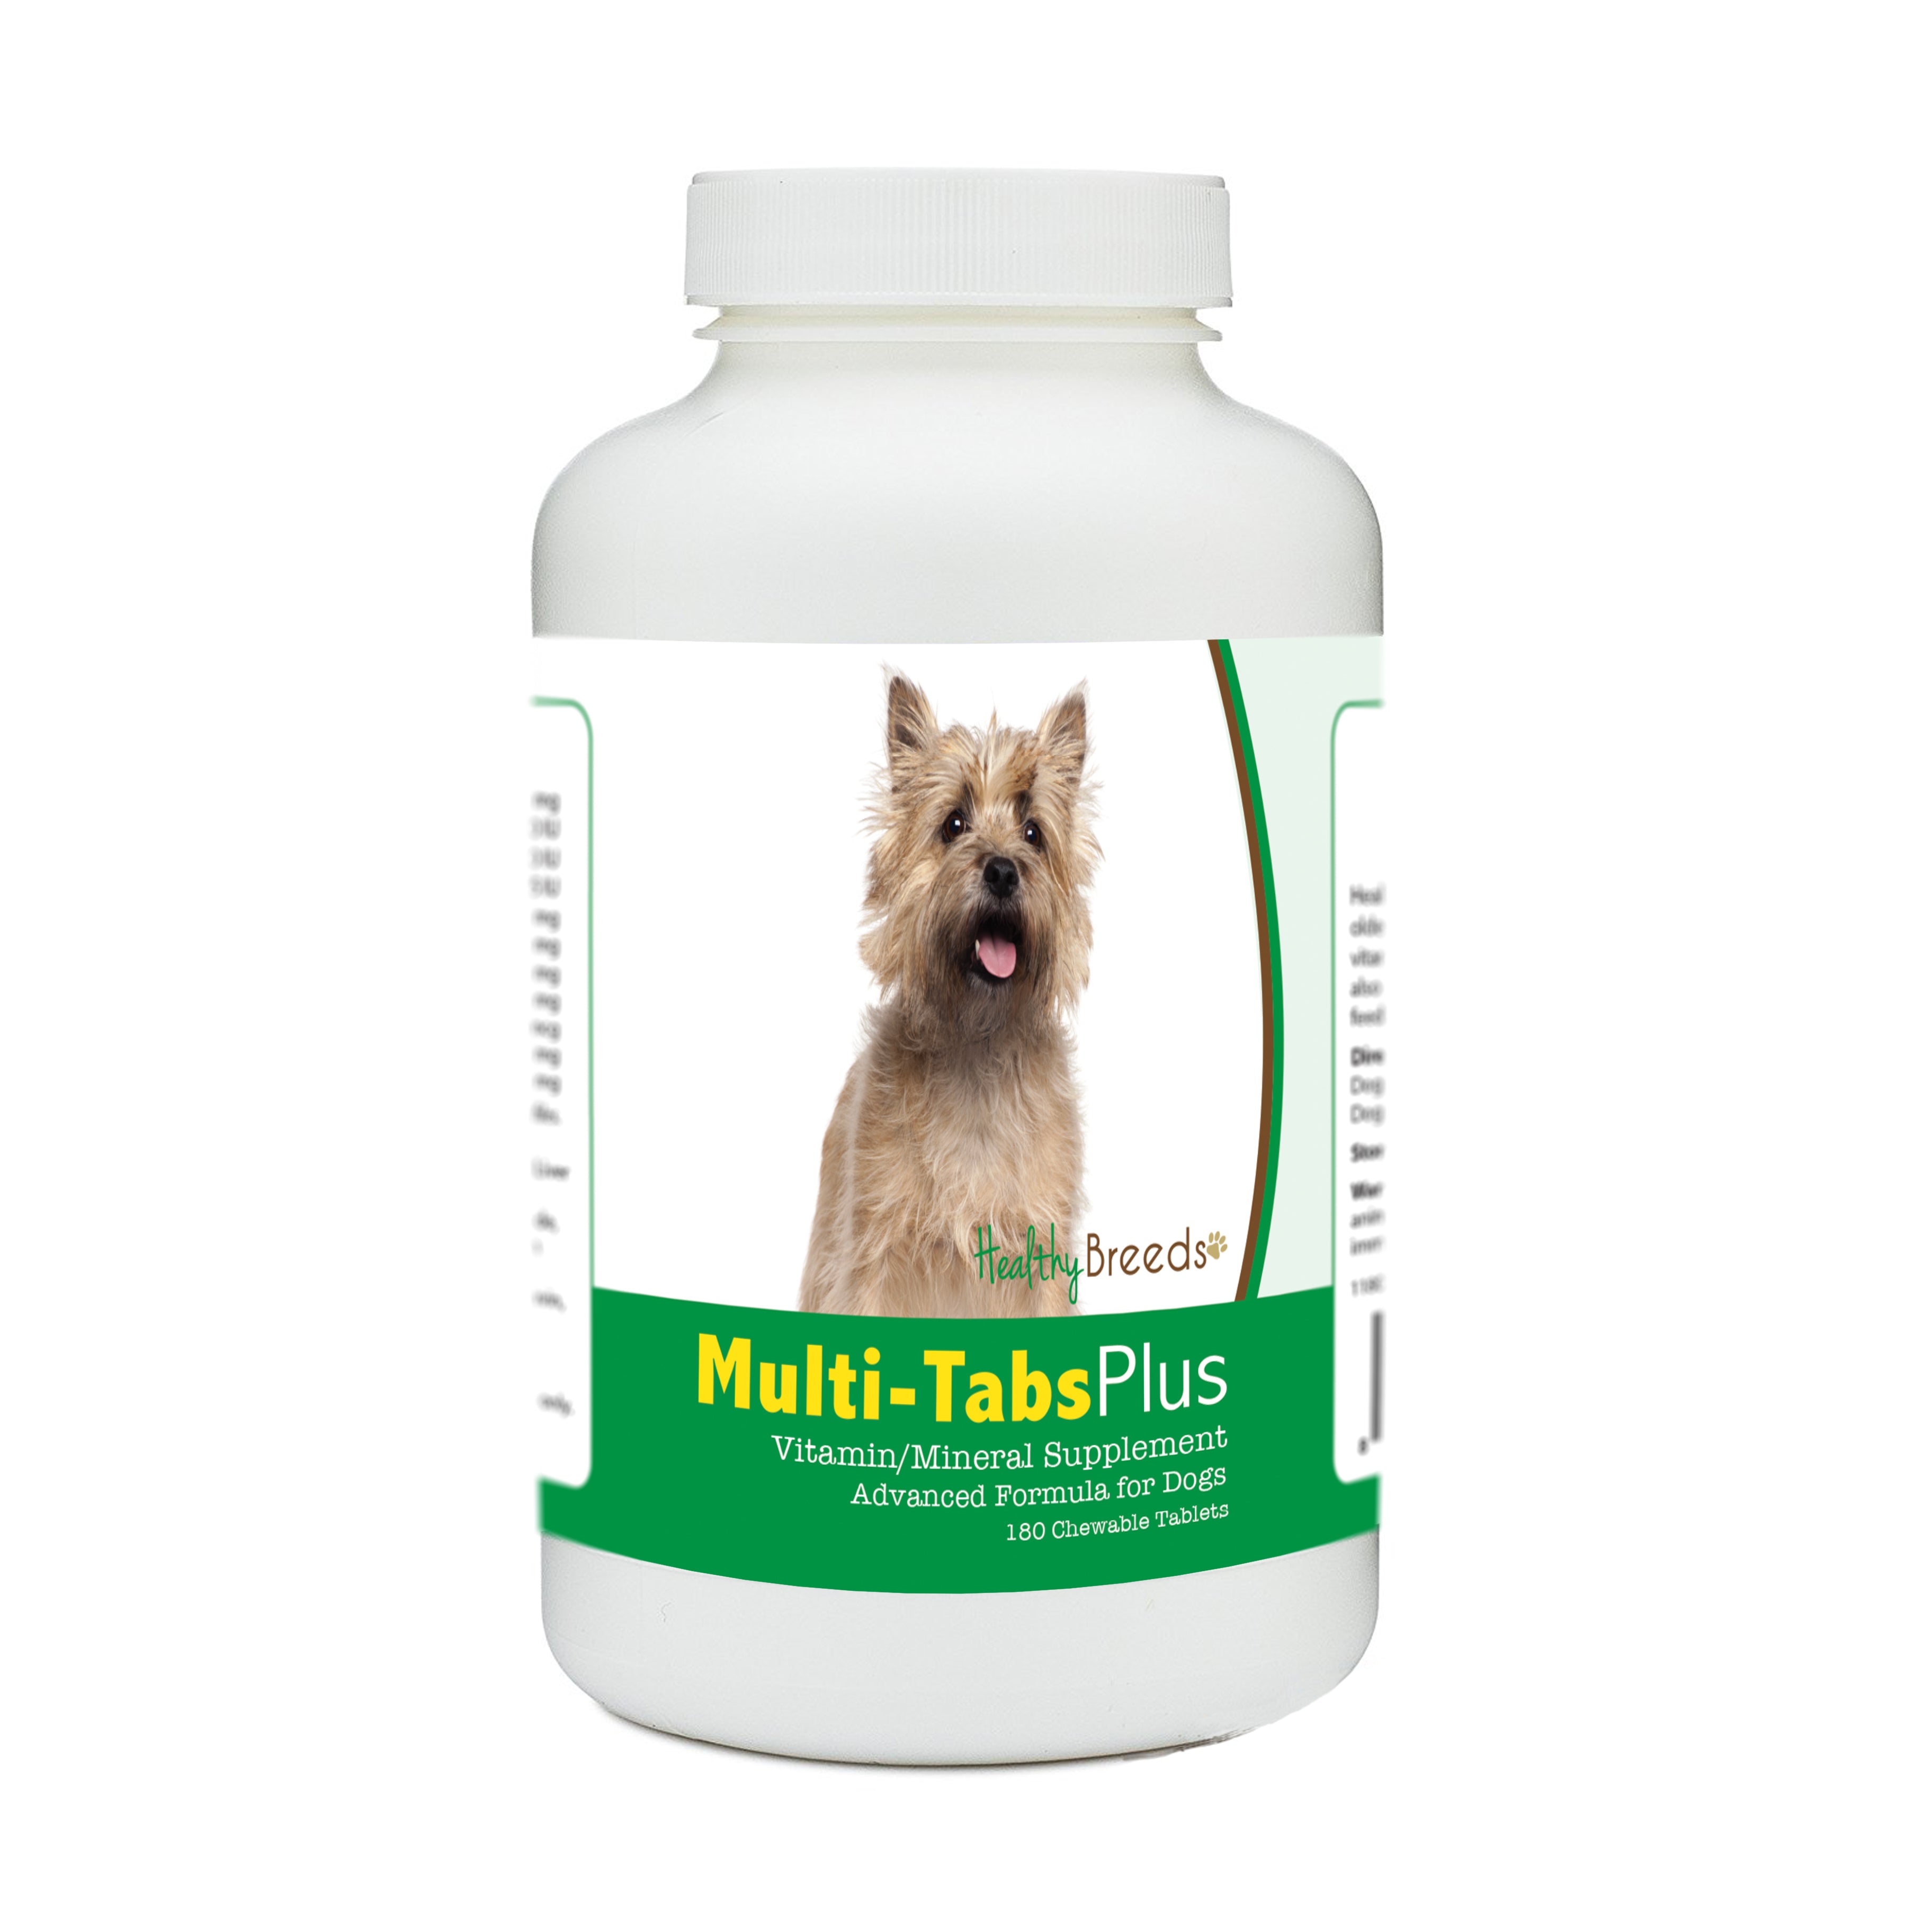 Cairn Terrier Multi-Tabs Plus Chewable Tablets 180 Count